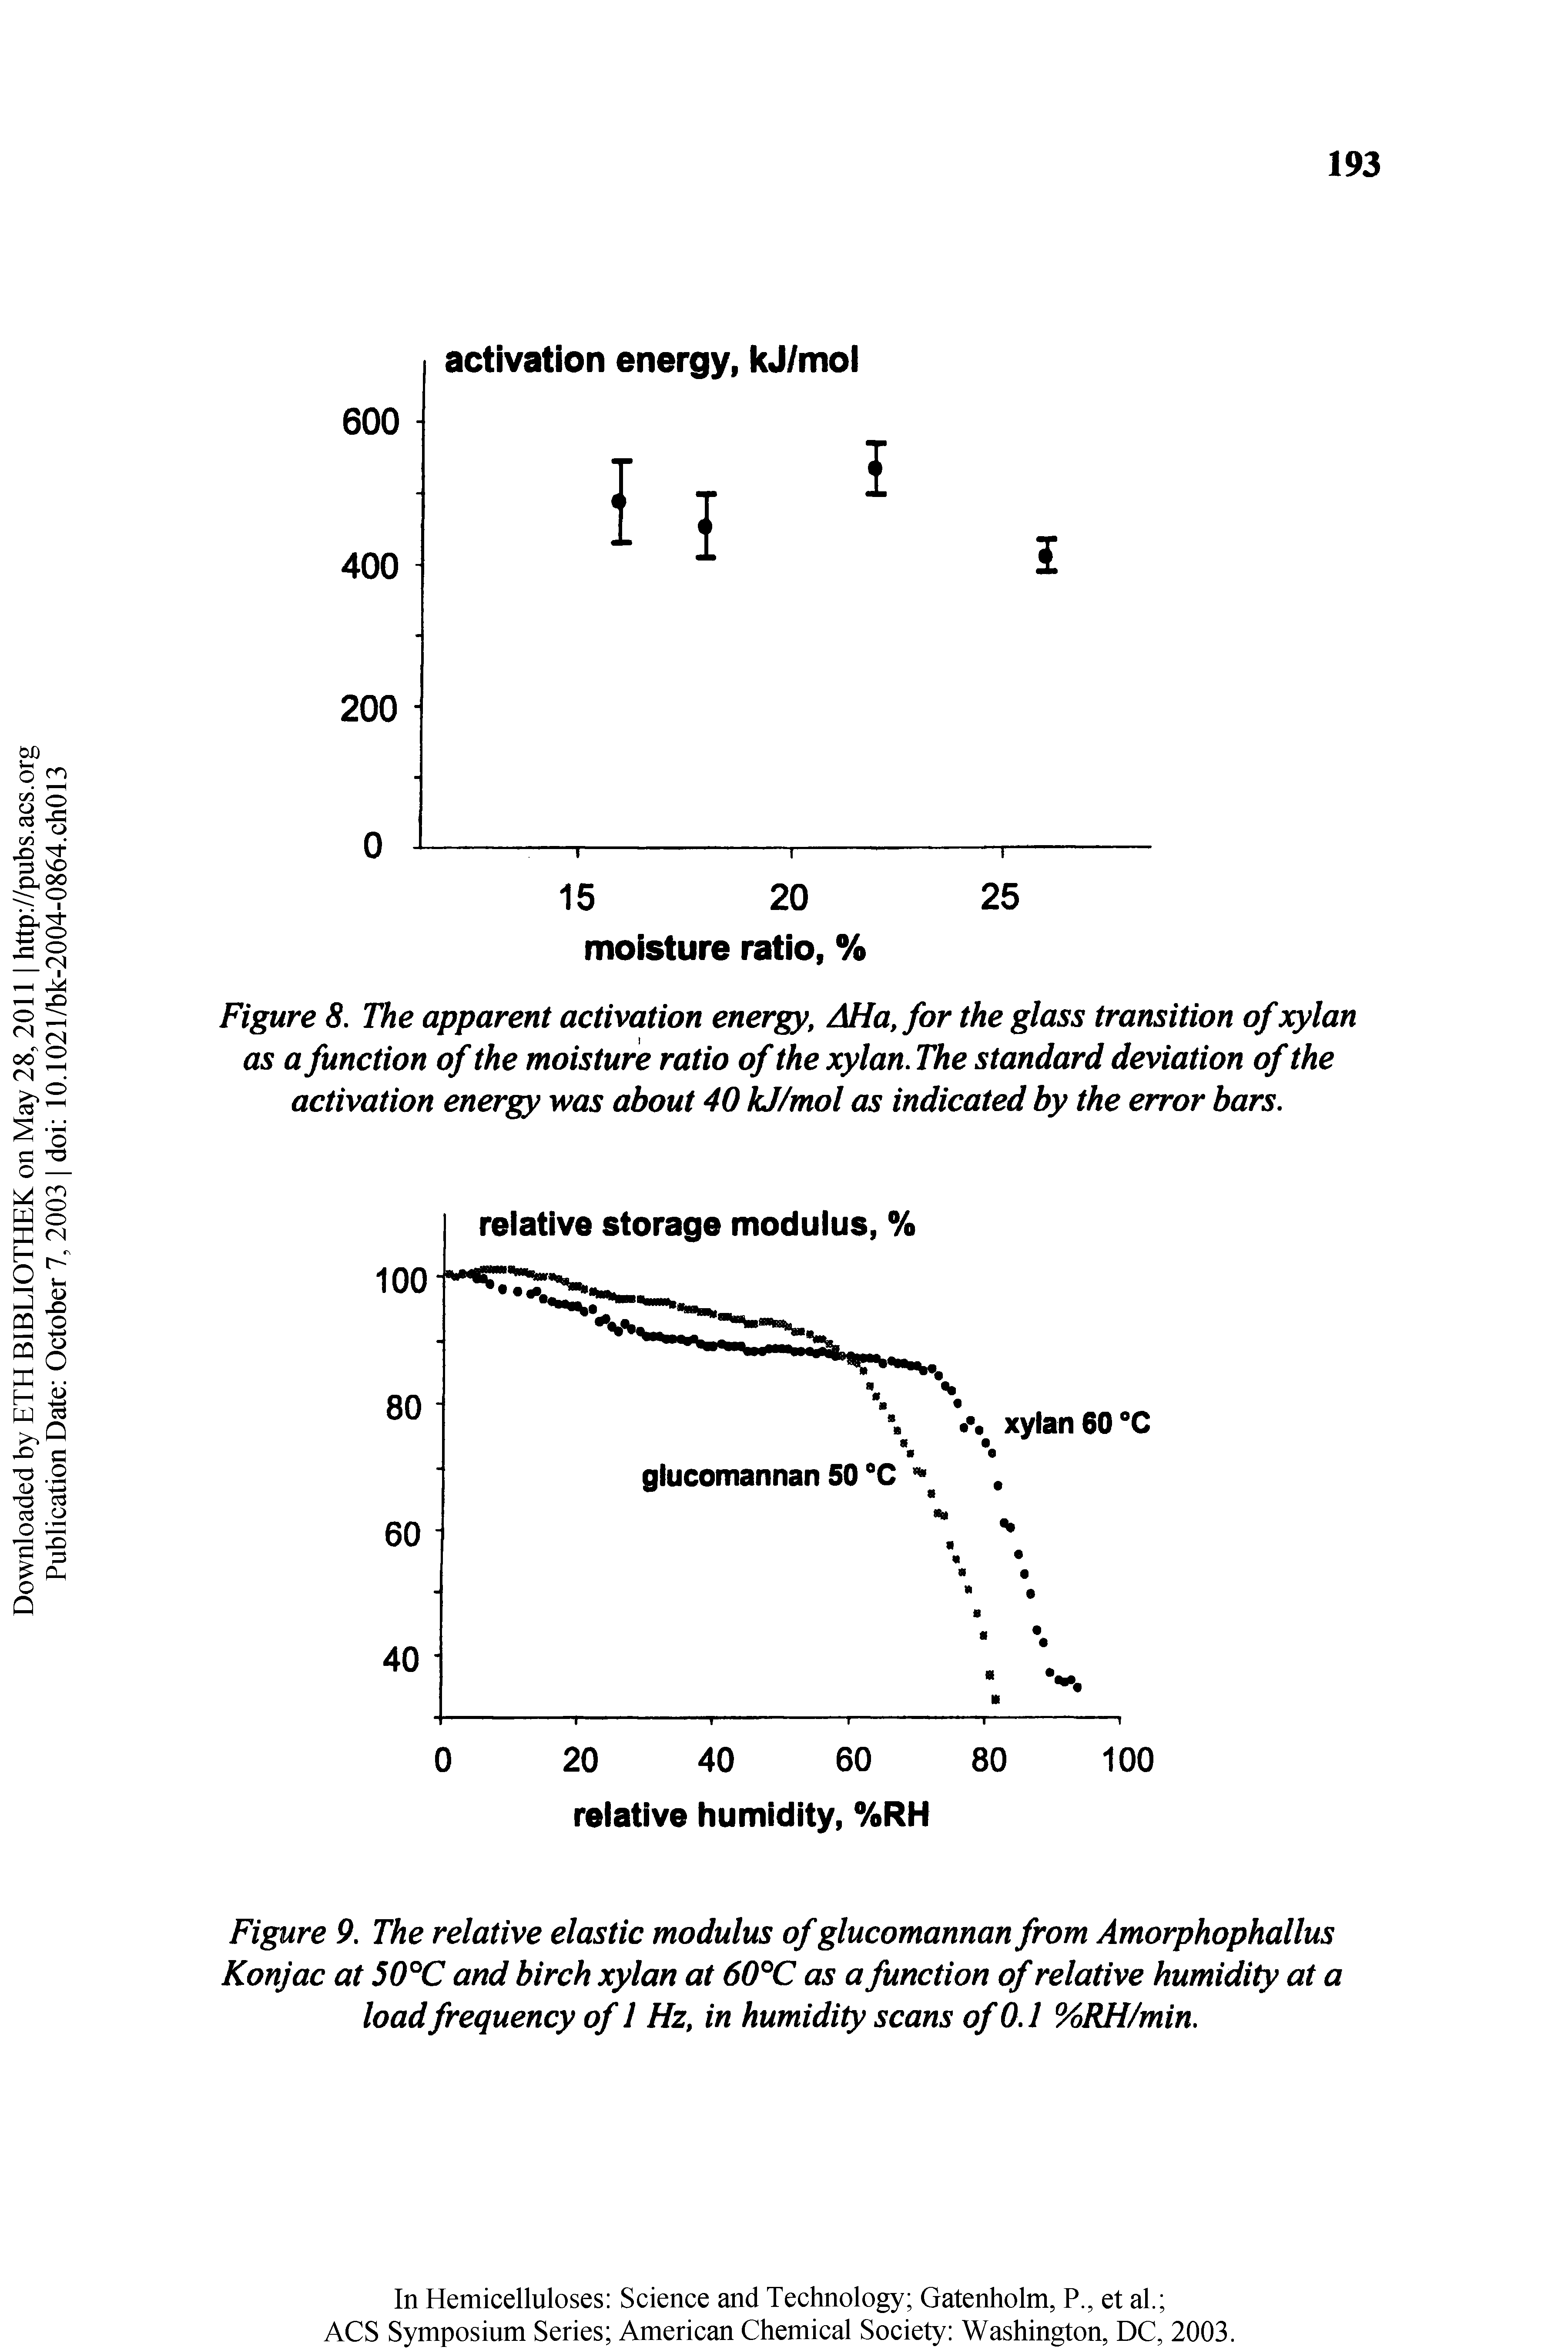 Figure 9. The relative elastic modulus of glucomannan from Amorphophallus Konjac at 50°C and birch xylan at 60°C as a function of relative humidity at a load frequency of 1 Hz, in humidity scans of 0.1 %RH/min.